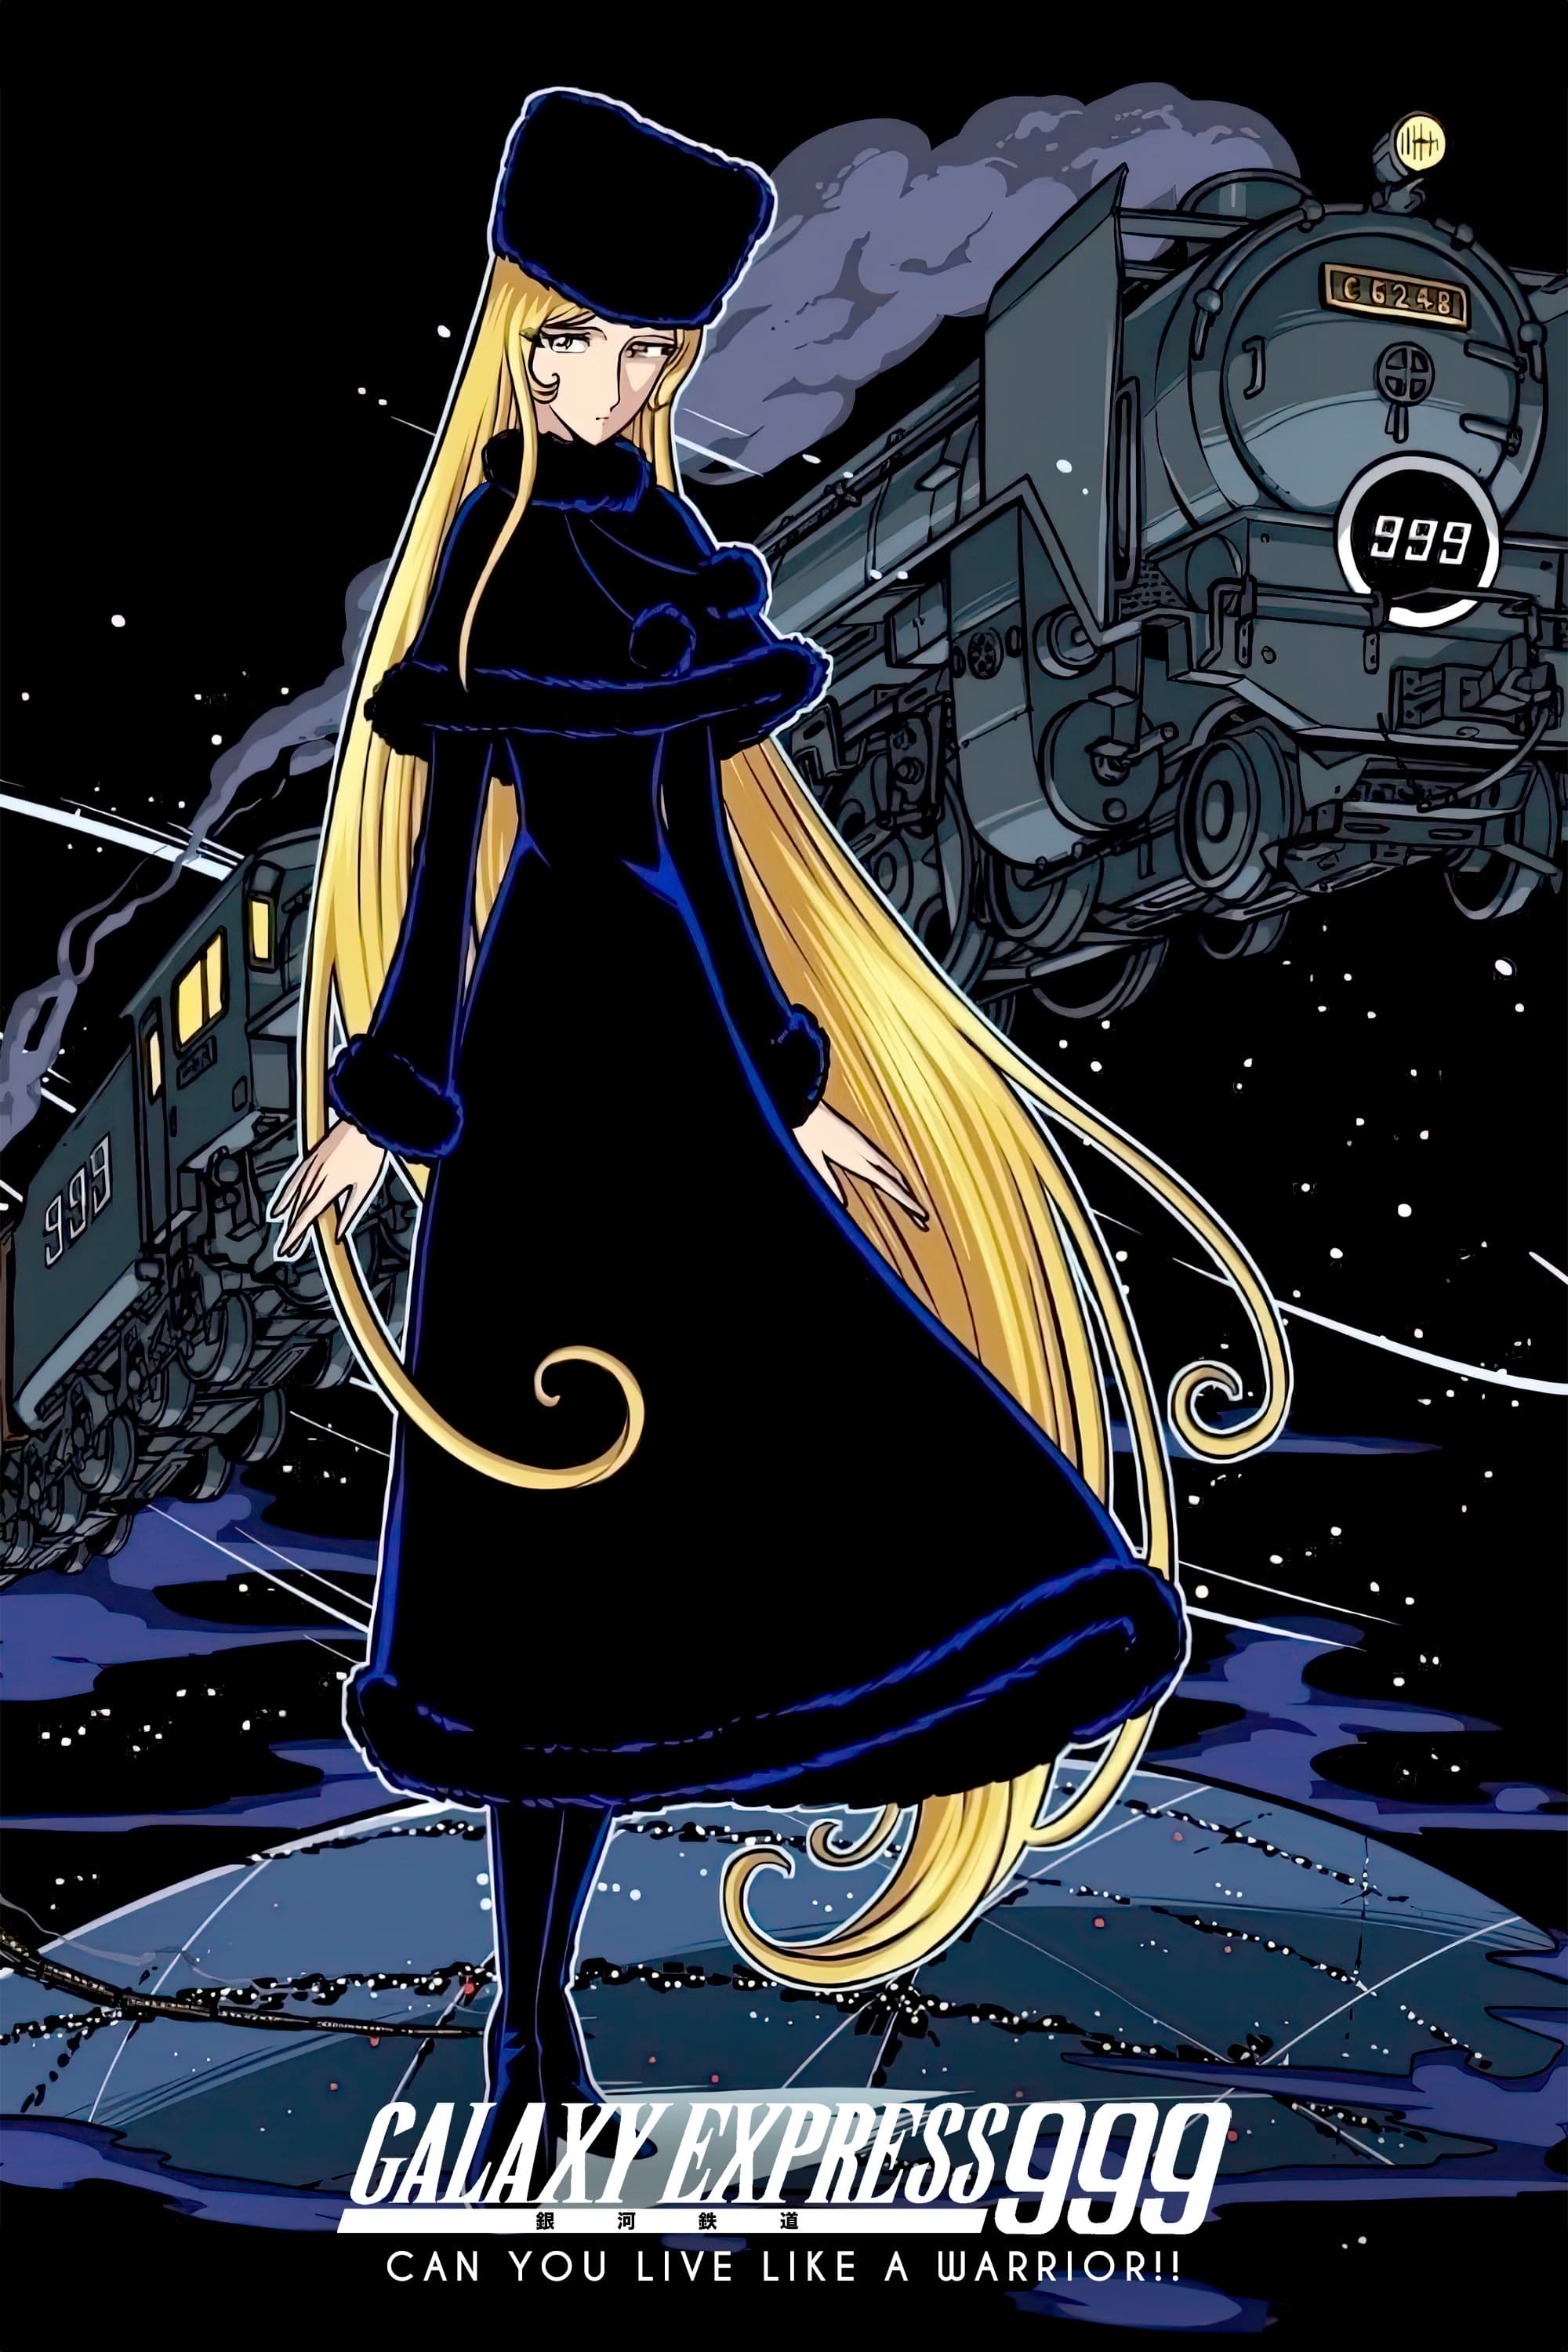 Galaxy Express 999: Can You Live Like a Warrior!! (1979)